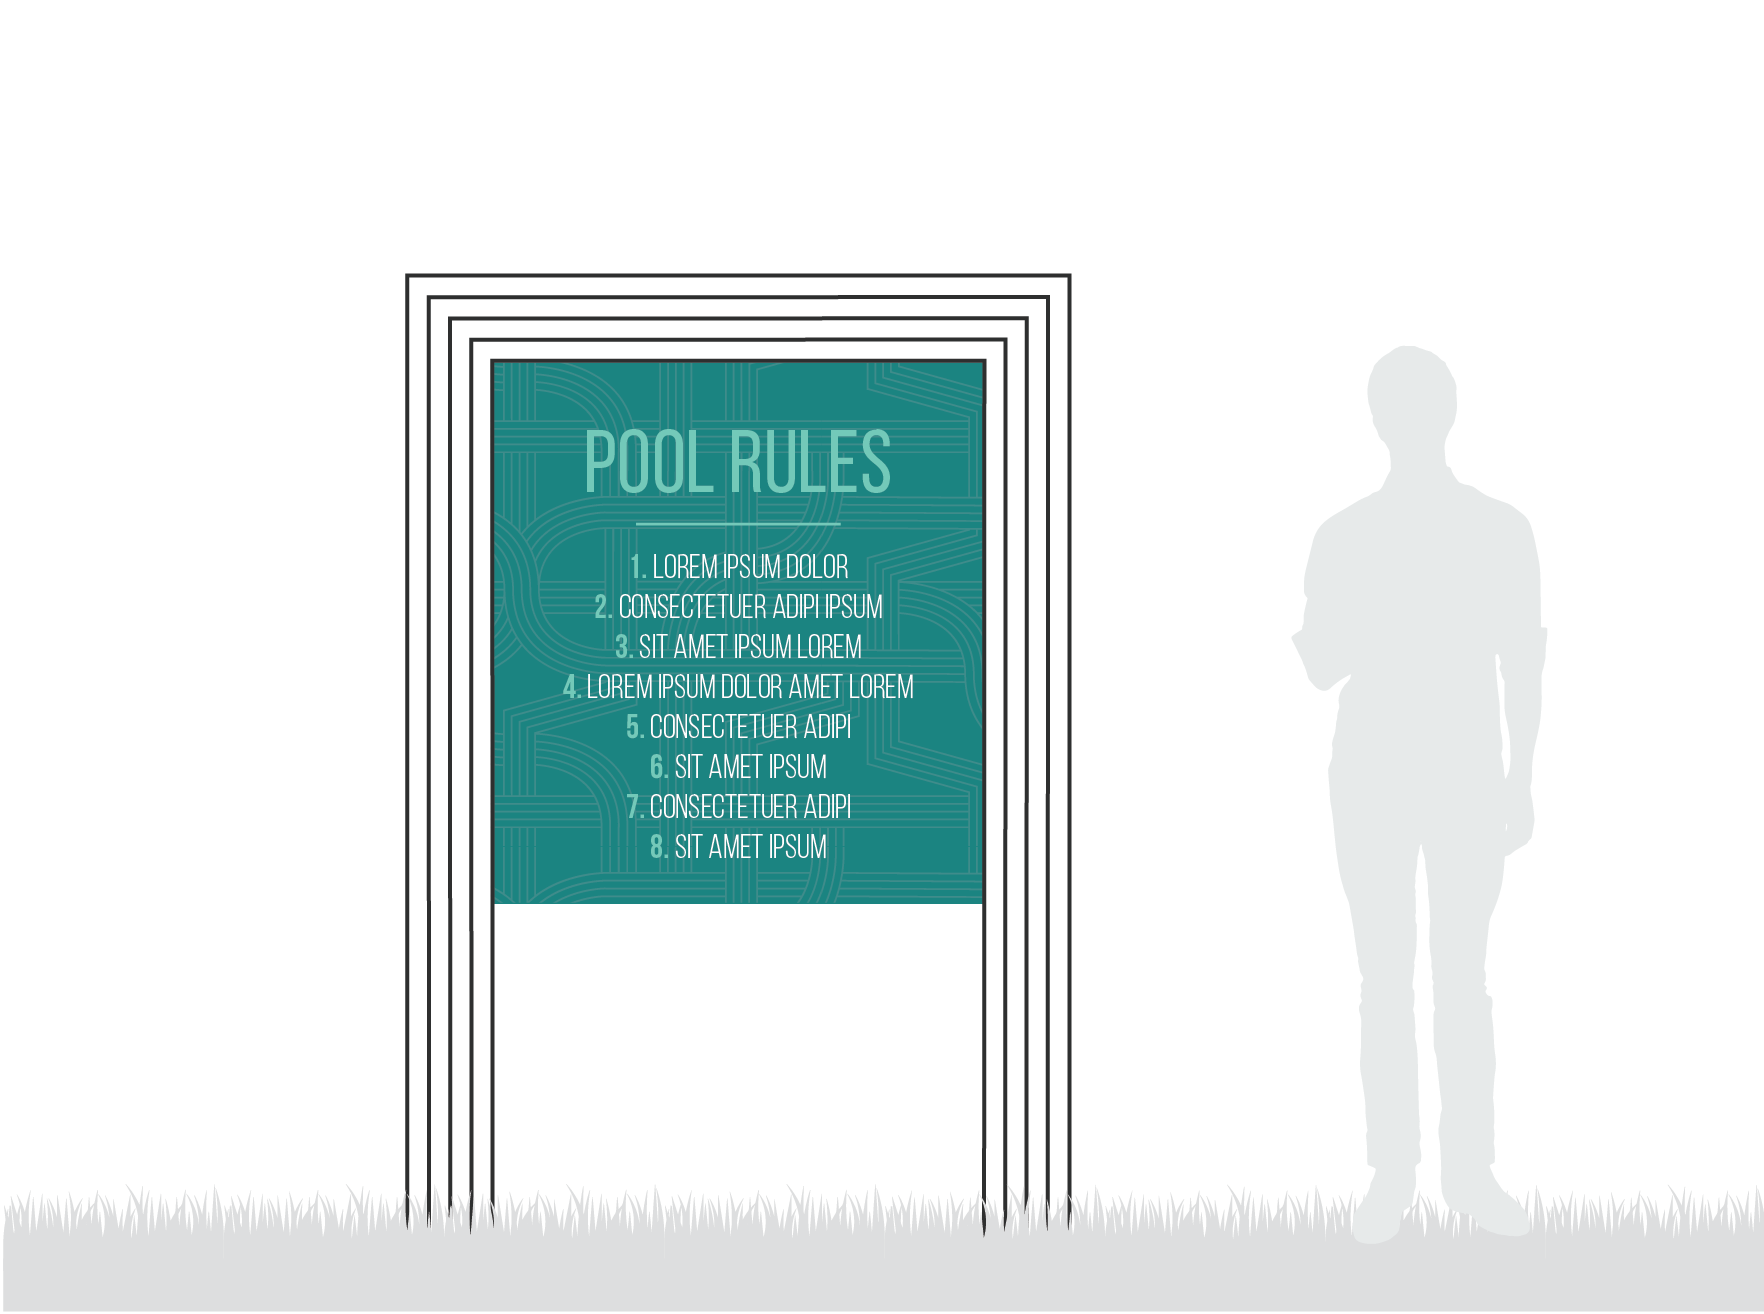 HED-003-signage-03-01-RH_Pool Rules 2.png